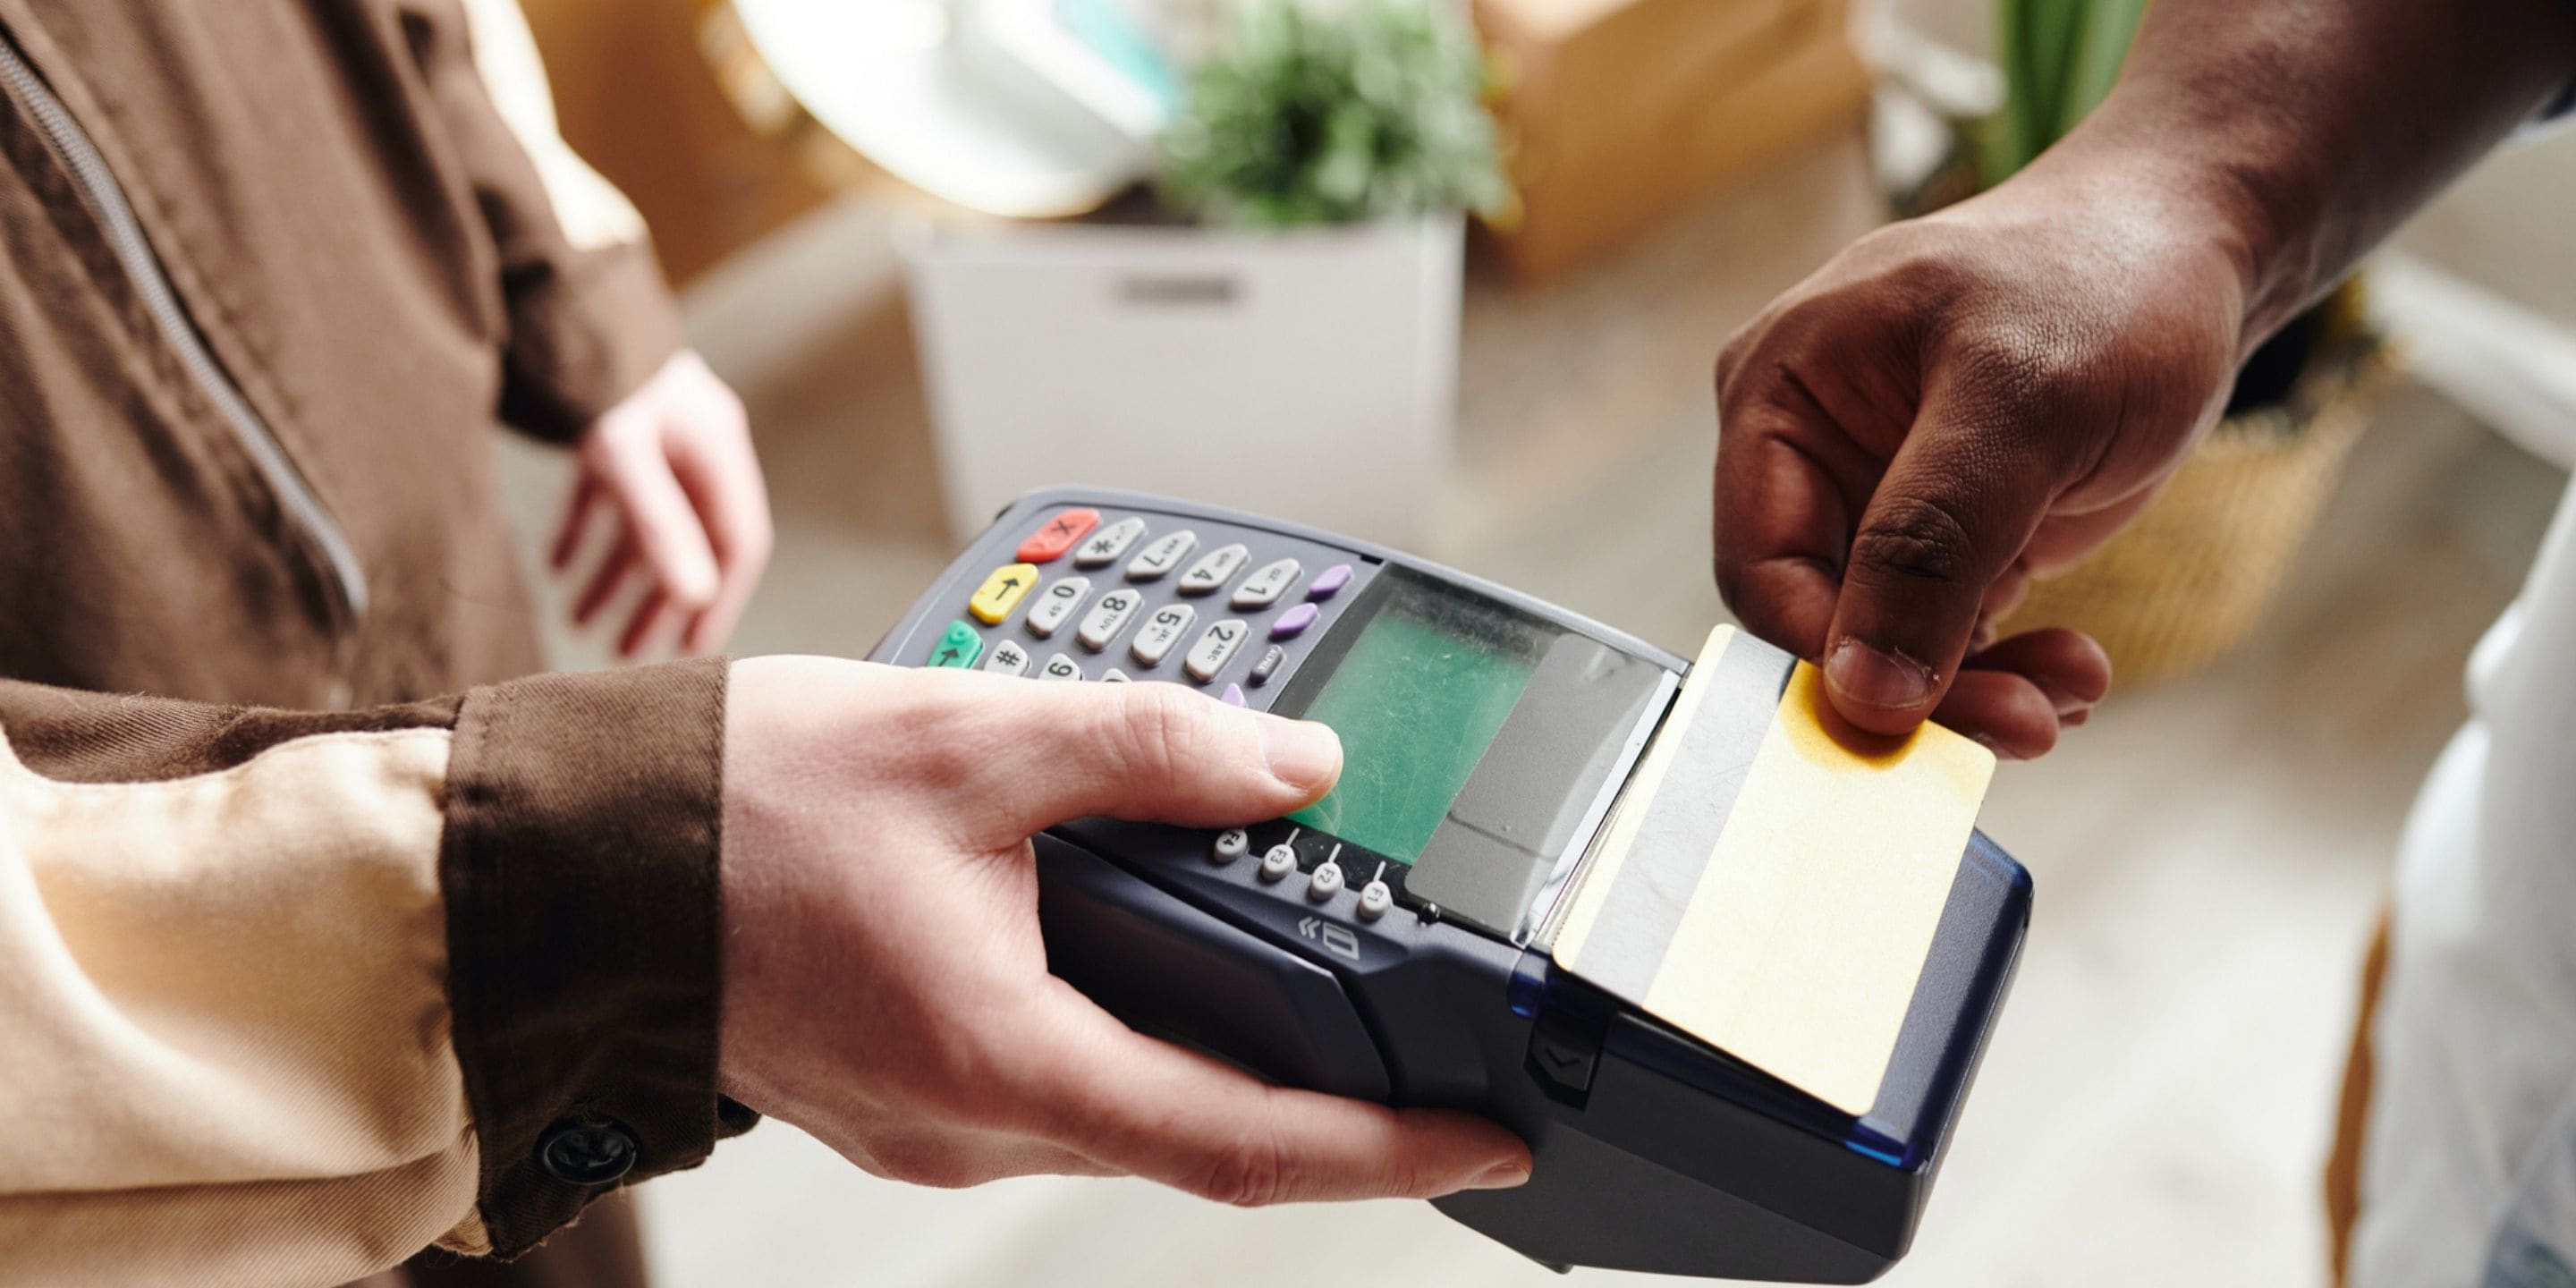 A person taps a credit or debit card on a card-reader at a store.